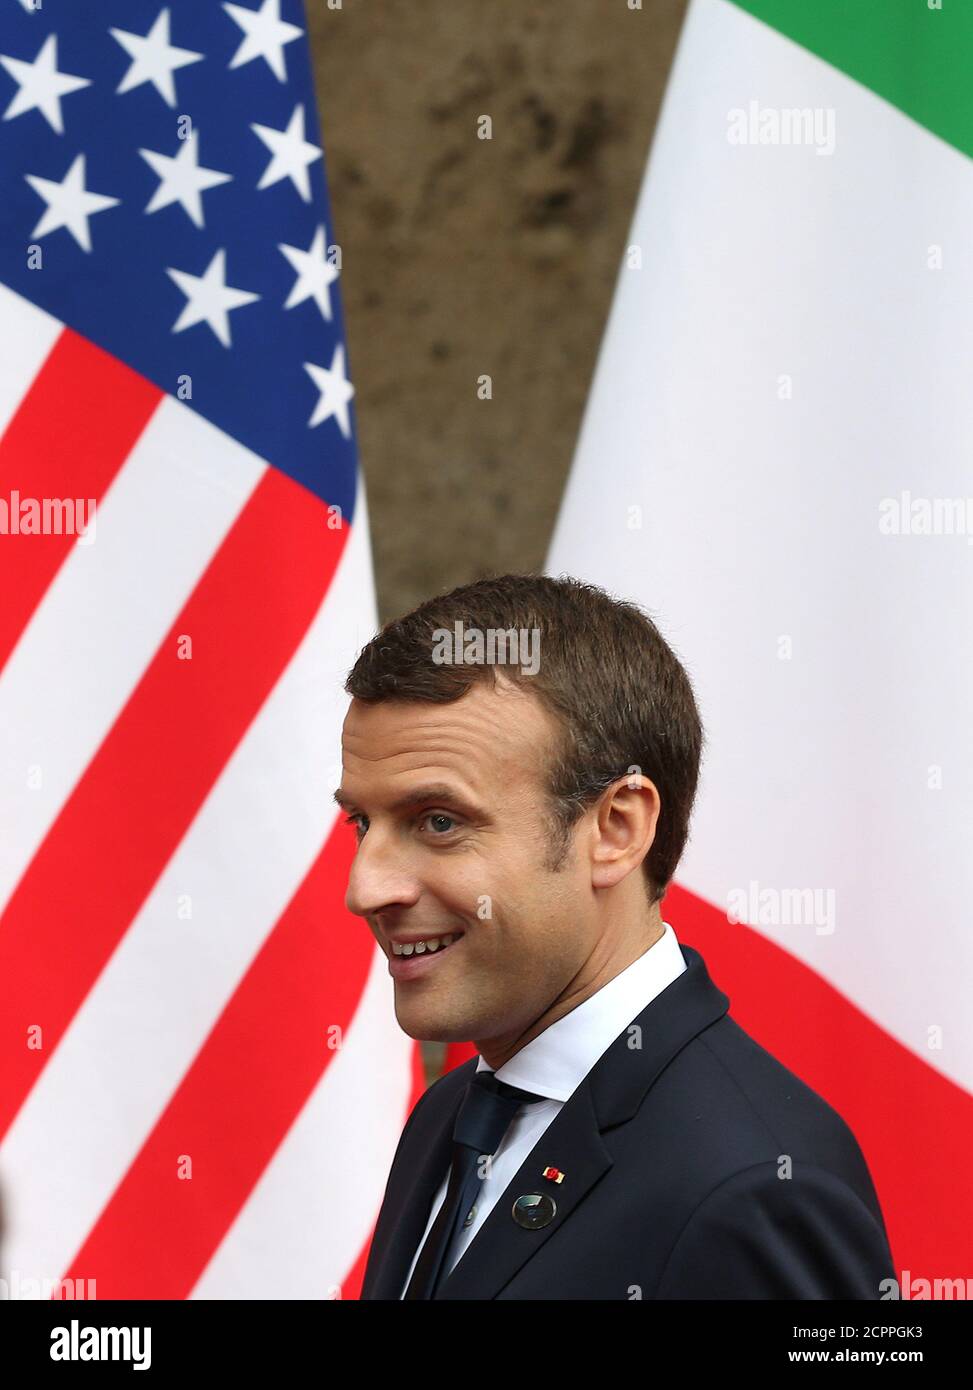 France’s President Emmanuel Macron attends the G7 summit in Taormina, Sicily, Italy, May 26, 2017. REUTERS/Alessandro Bianchi Stock Photo